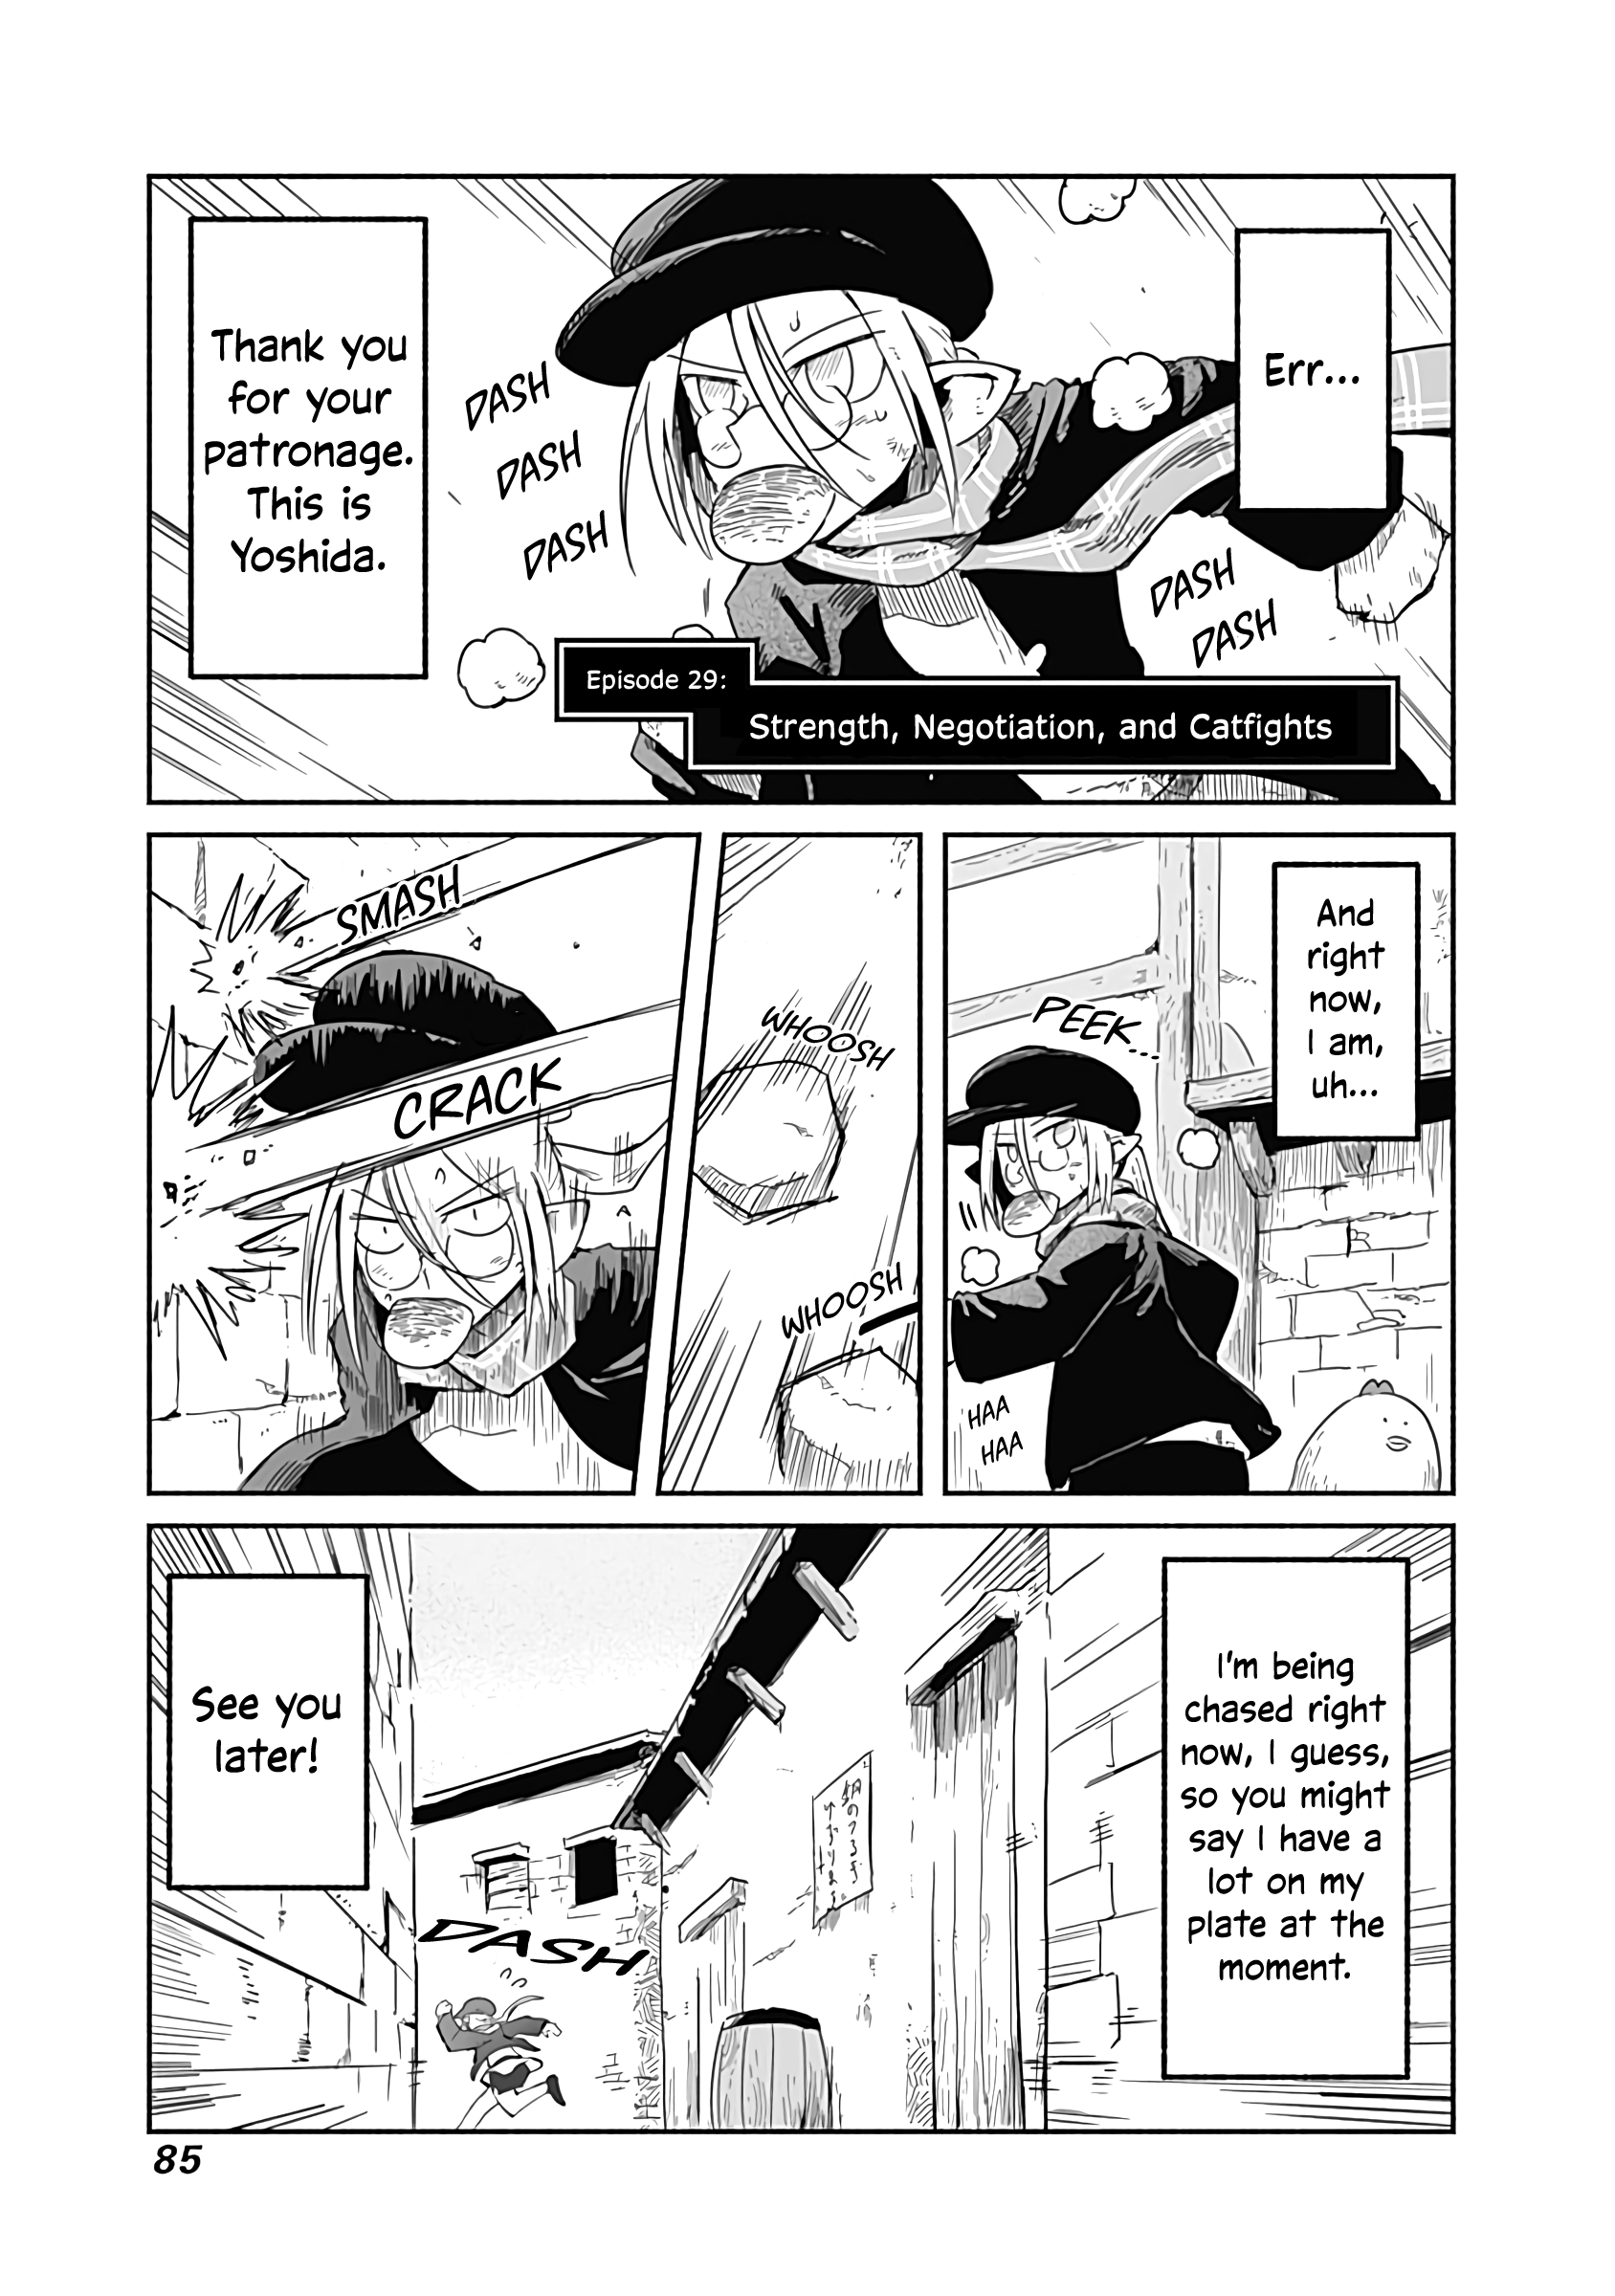 The Dragon, The Hero, And The Courier Vol.5 Chapter 29: Strength, Negotiation, And Catfights - Picture 2